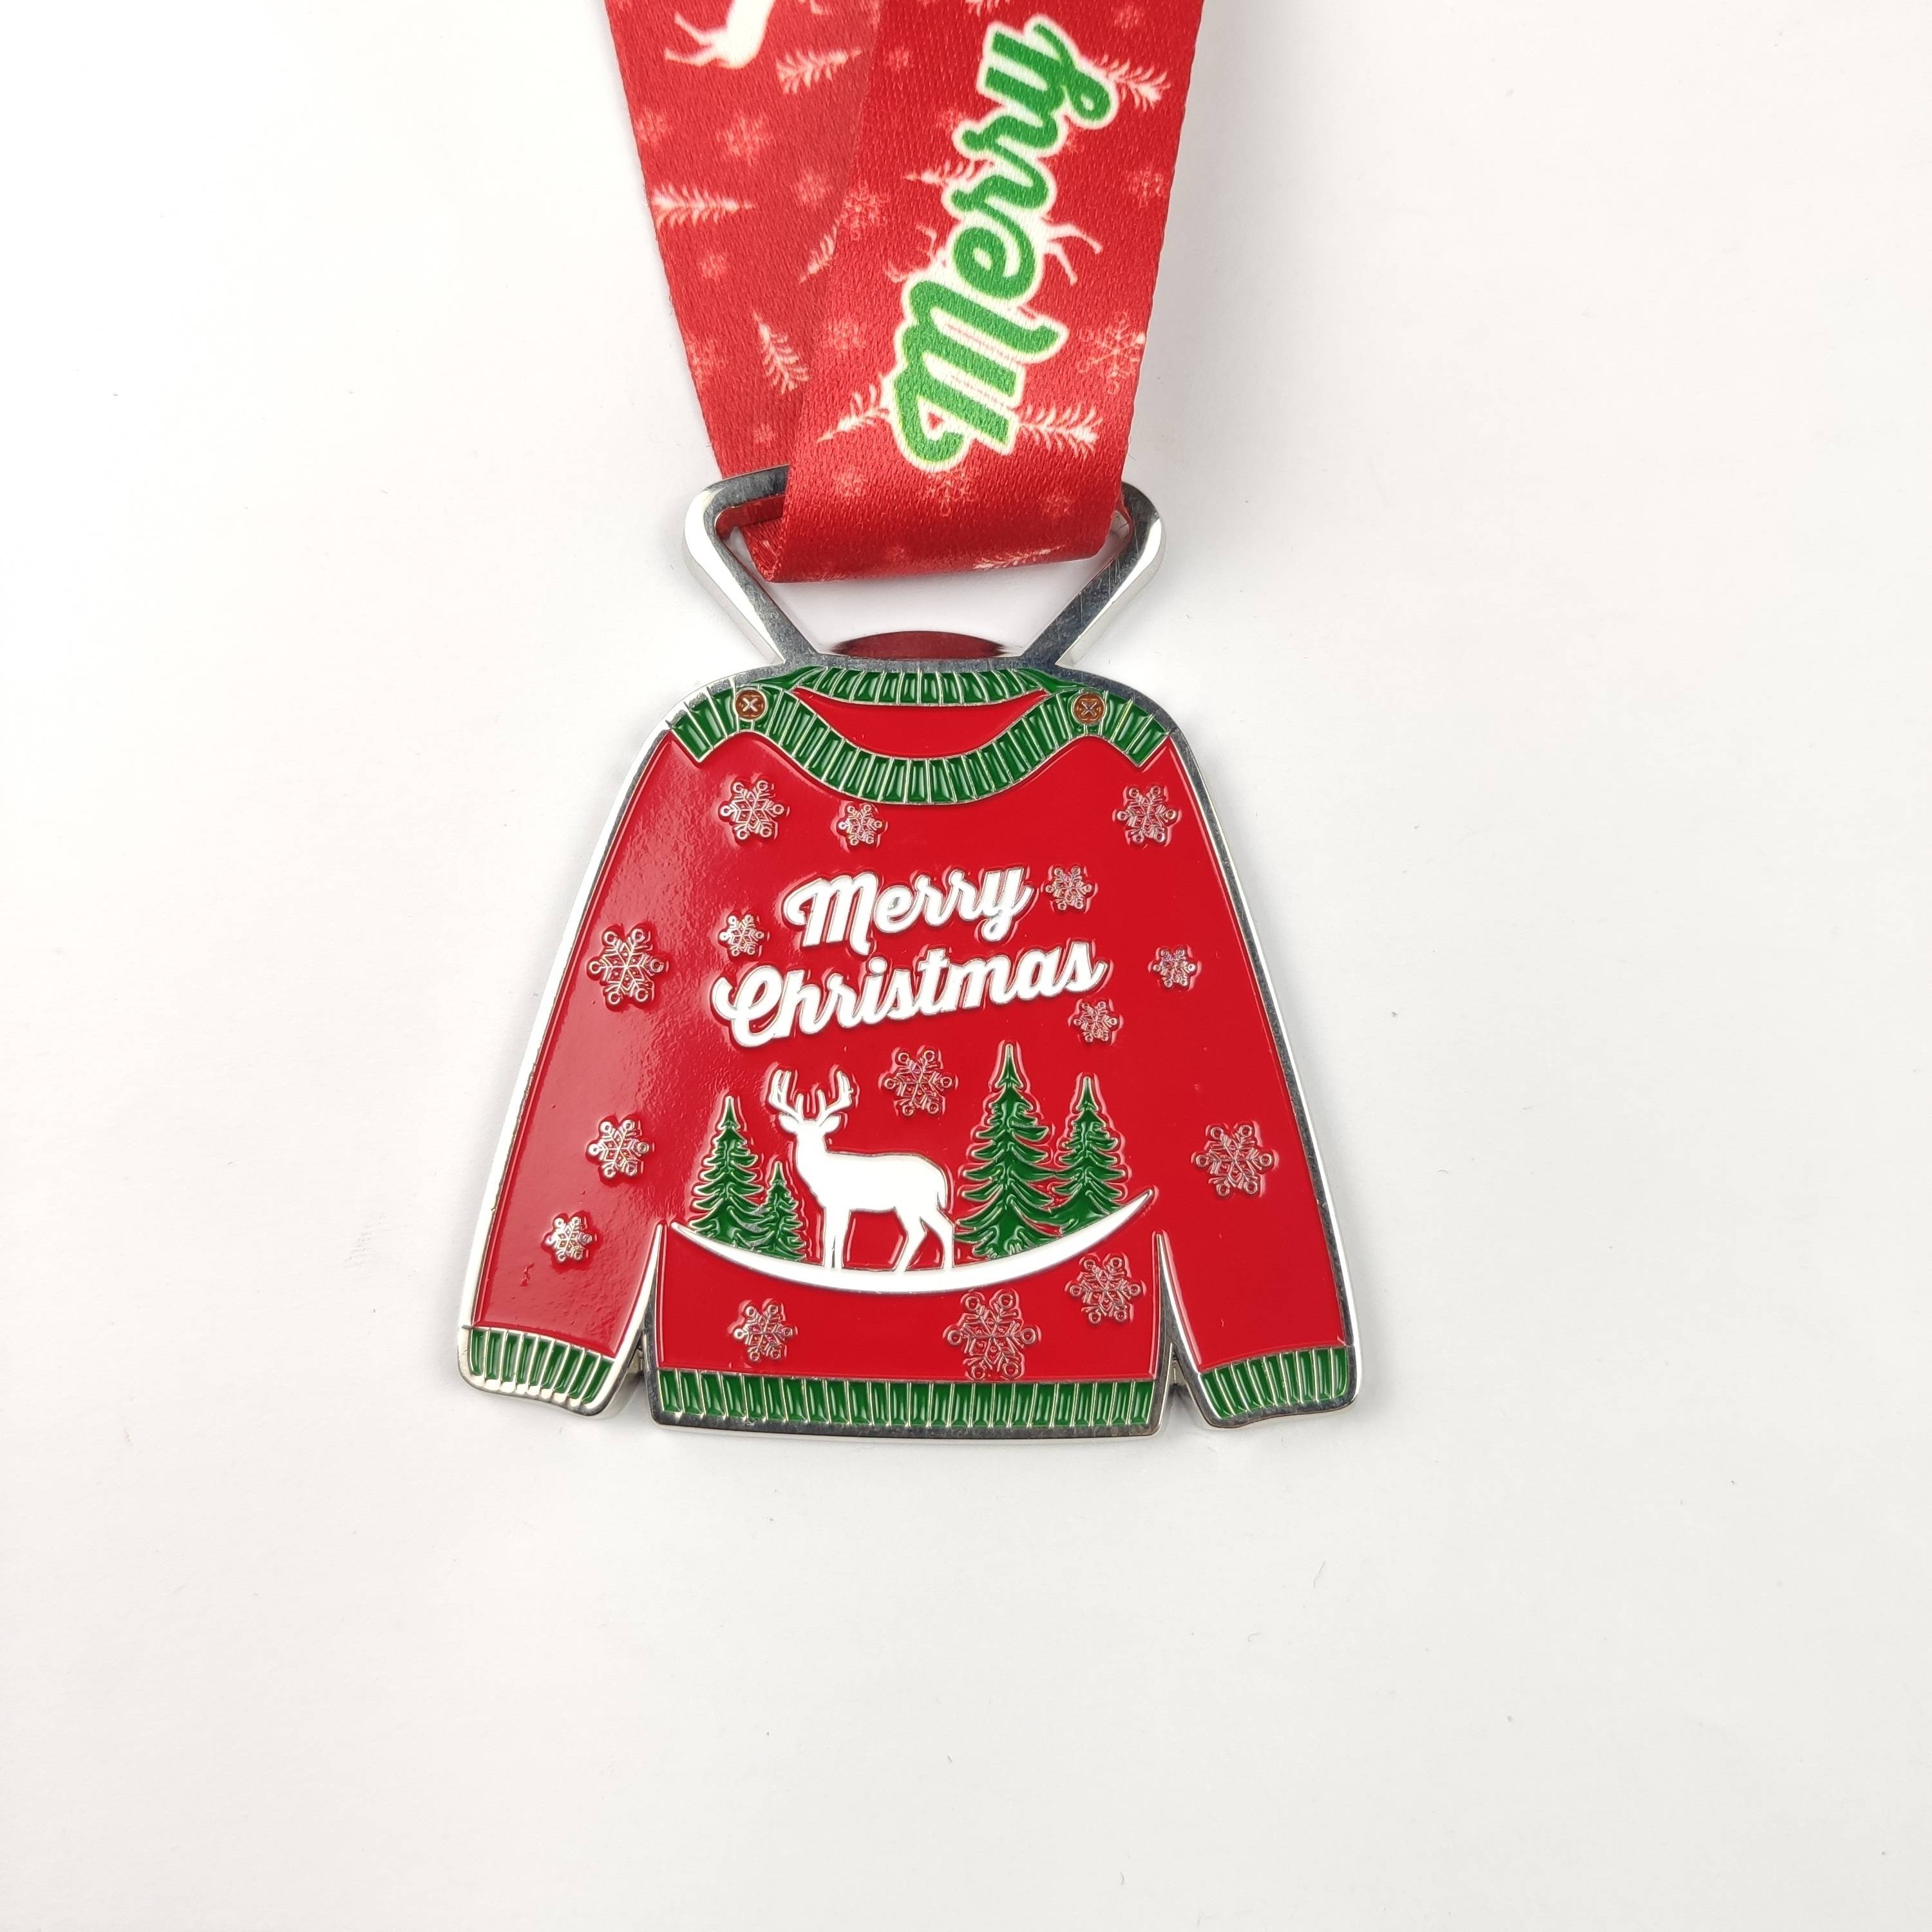 factory low price Sublimation Medal - Manufacturer OEM ODM Free Design Custom Themed Ugly Christmas Sweater Medal – Global Art Gifts